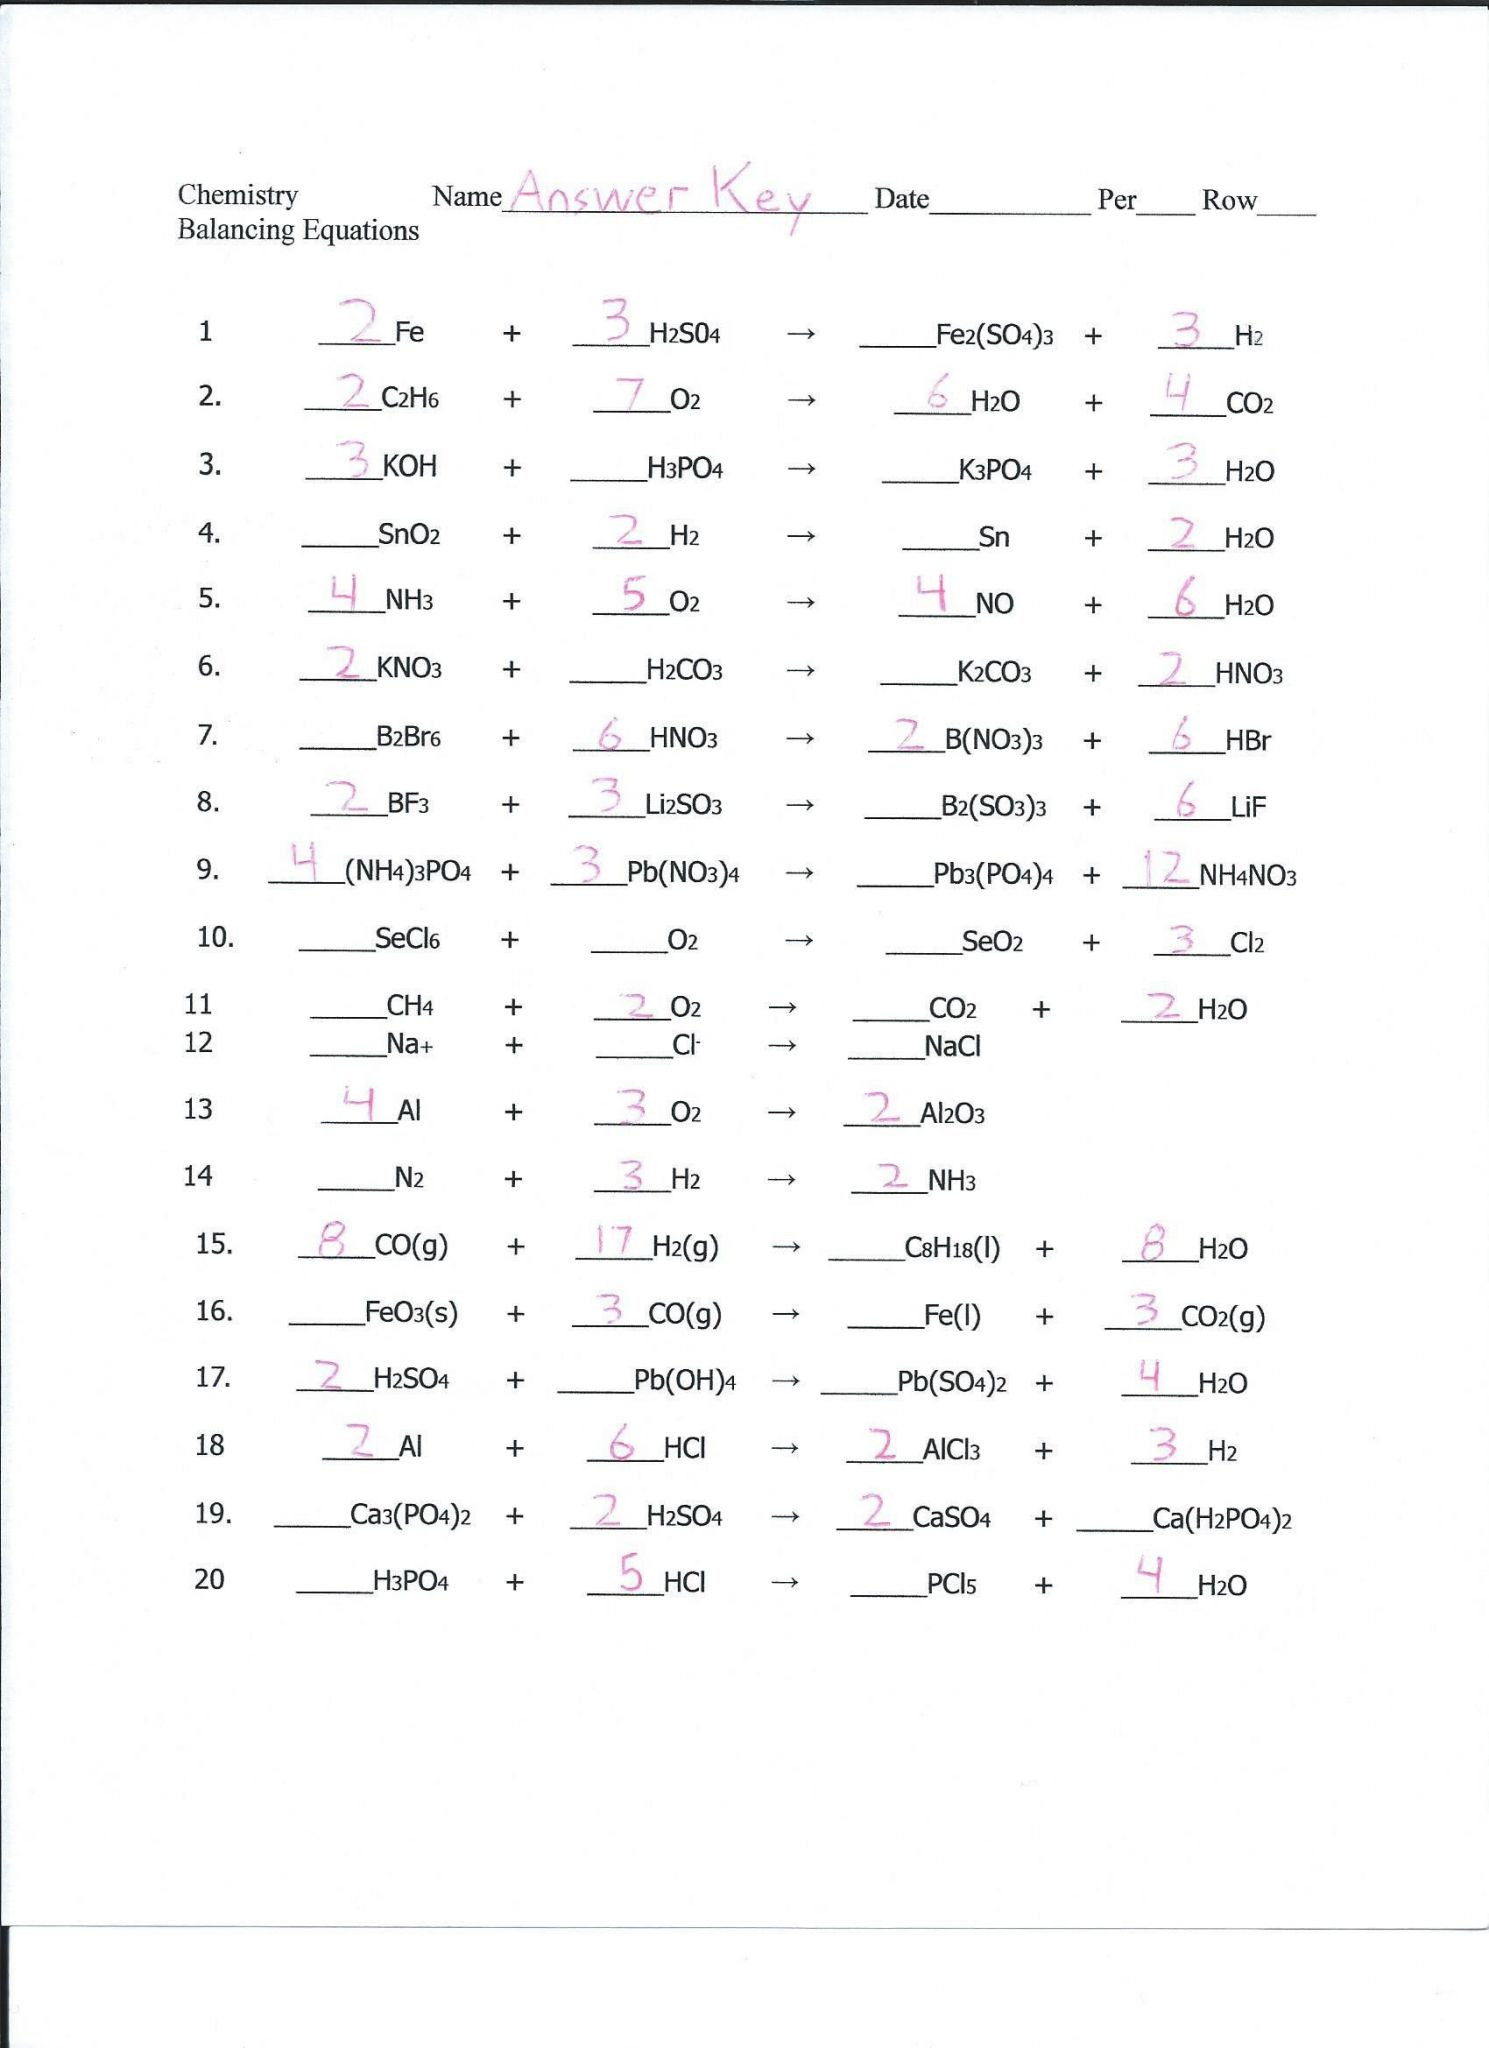 Chapter 7 Worksheet 1 Balancing Chemical Equations Answers — db-excel.com